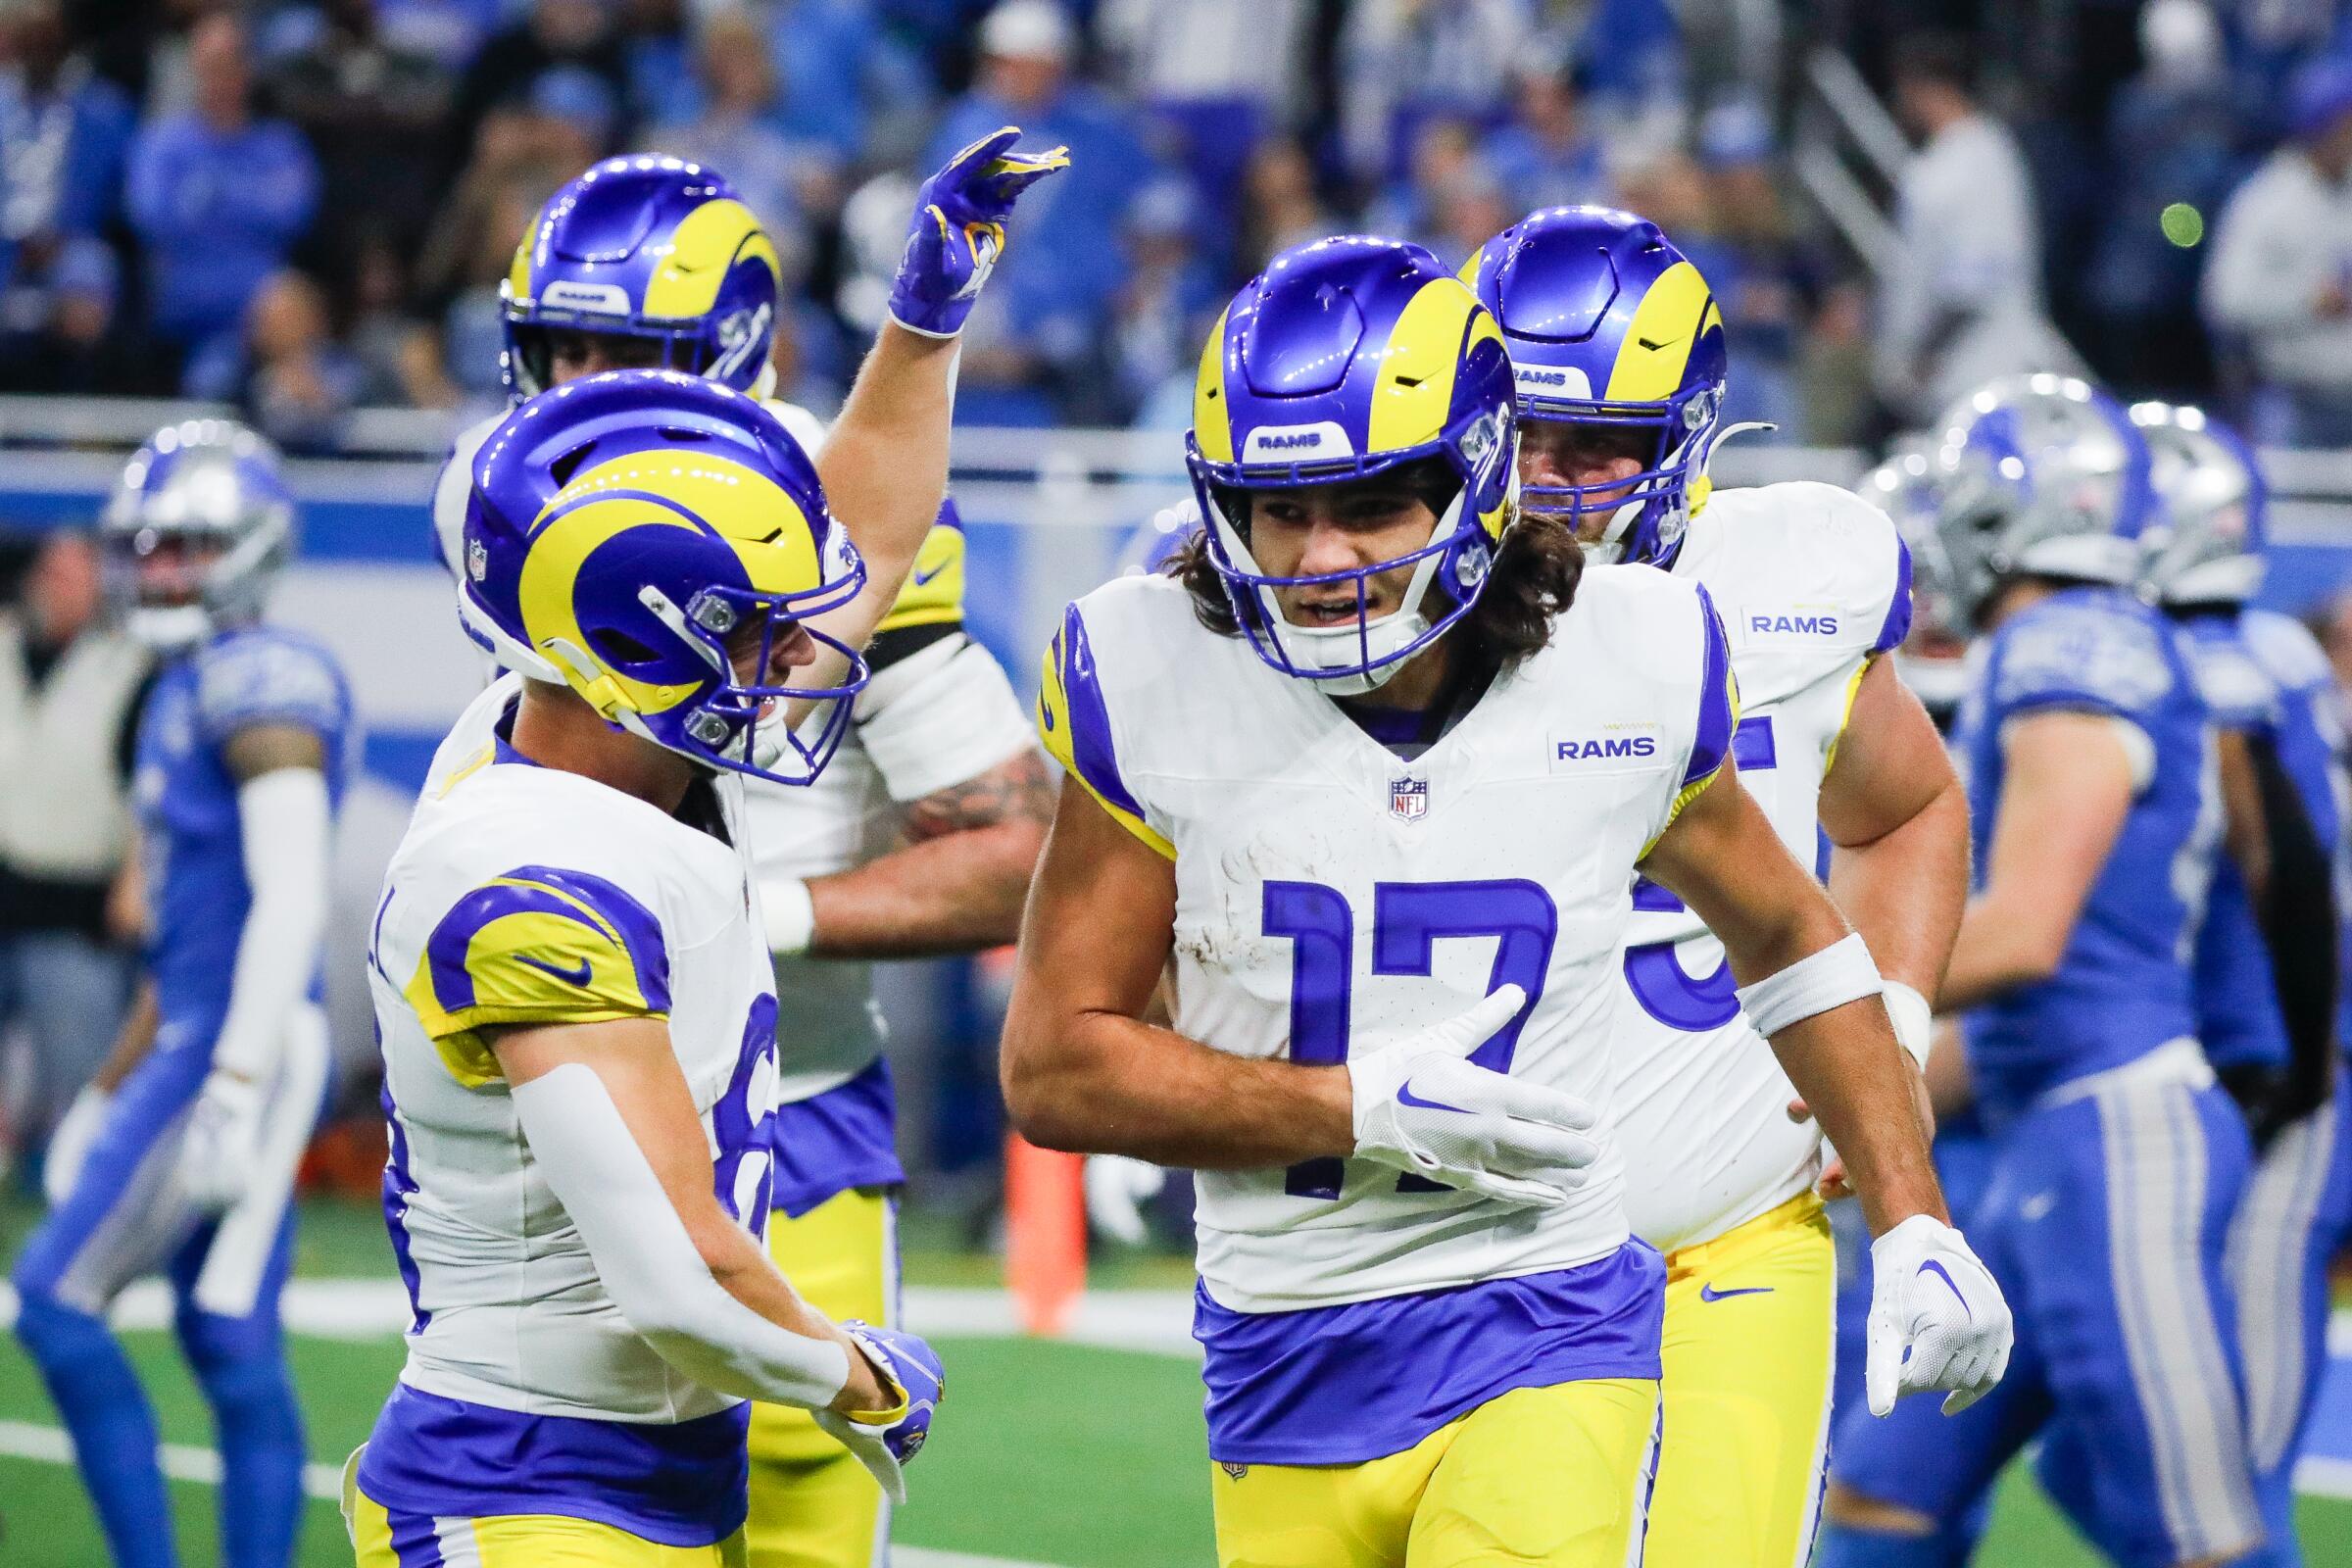 Rams wide receiver Puka Nacua (17) celebrates after scoring a touchdown against the Detroit Lions at Ford Field.